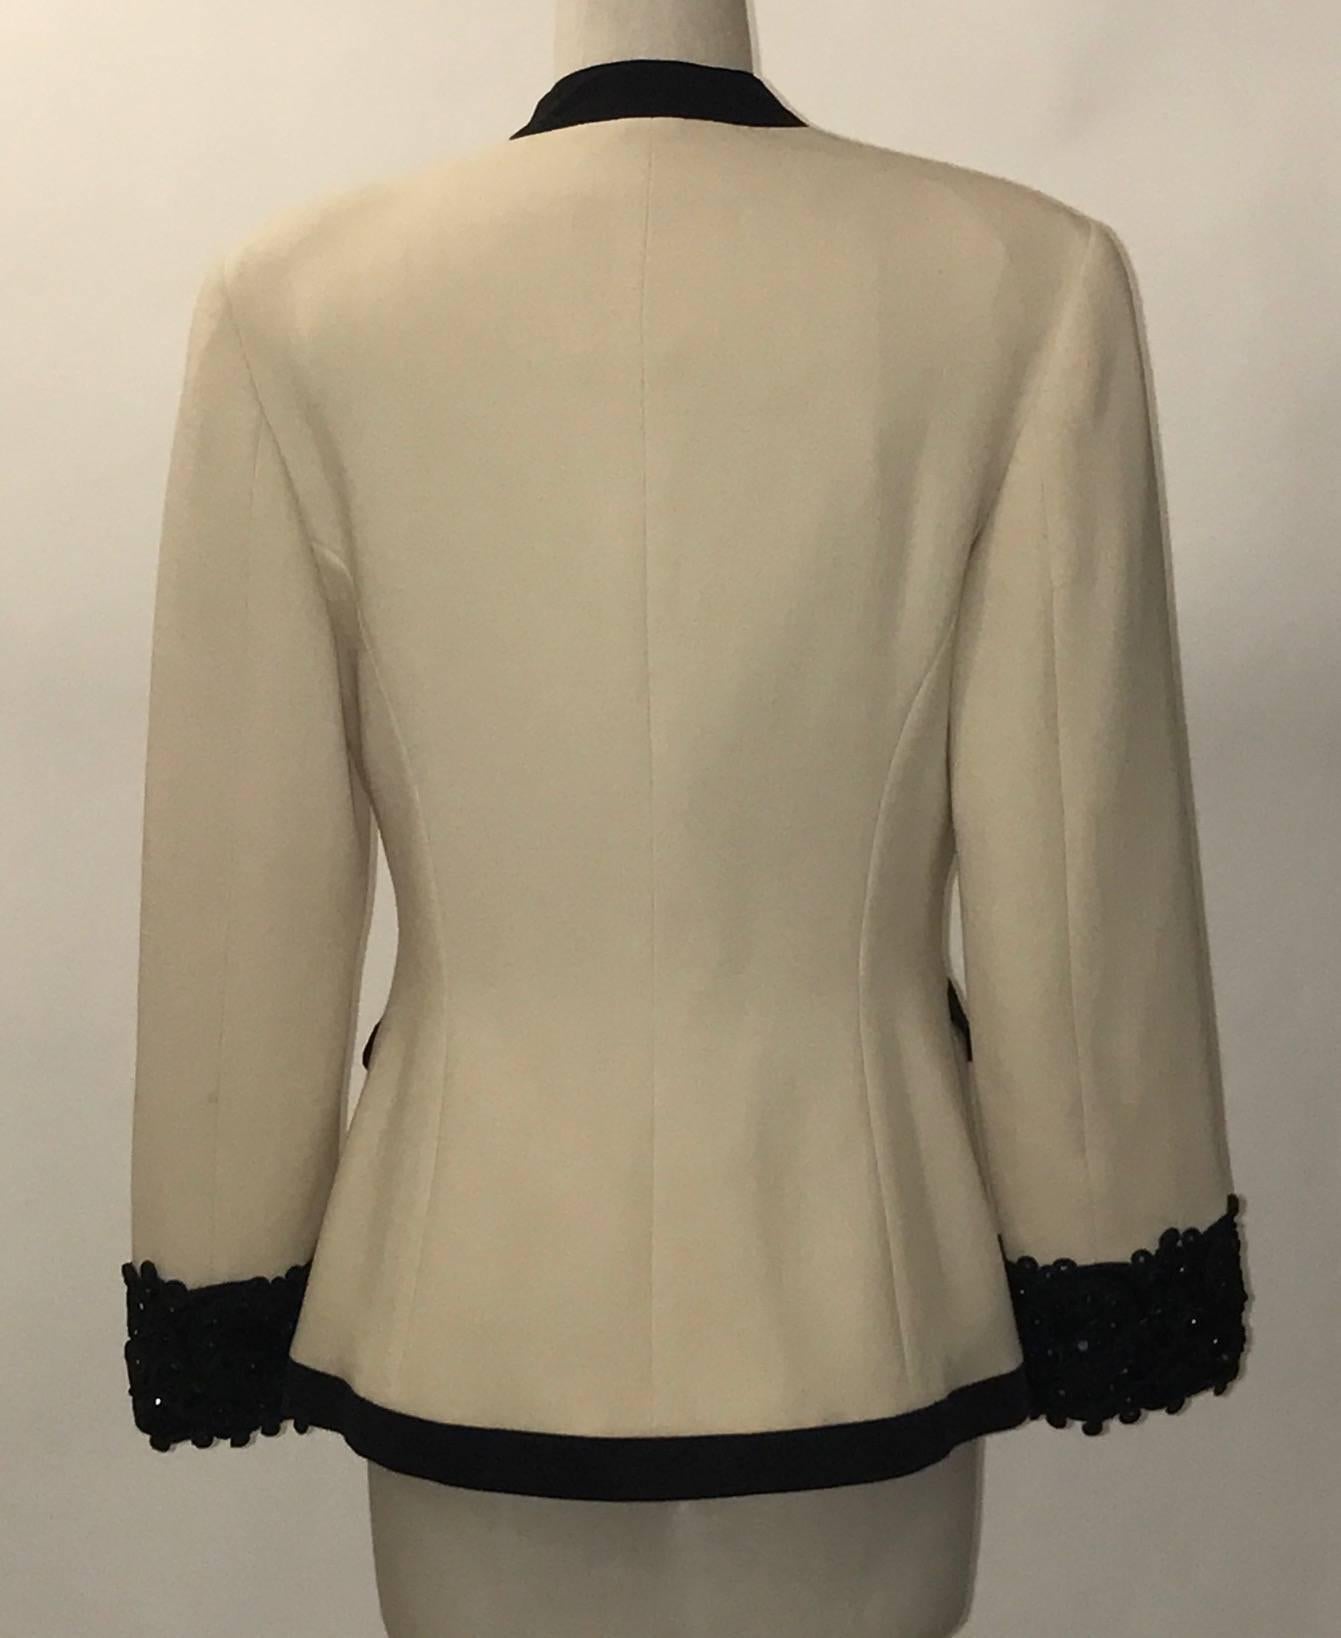 Cream wool crepe Genny blazer with three beaded snap closures at front and bead and sequin embellished cuffs. Black trim at pockets and edges. Fully lined, shoulder pads of mid-thickness.

100% wool.
Trimmed in 68% cotton, 32% viscose. 
Fully